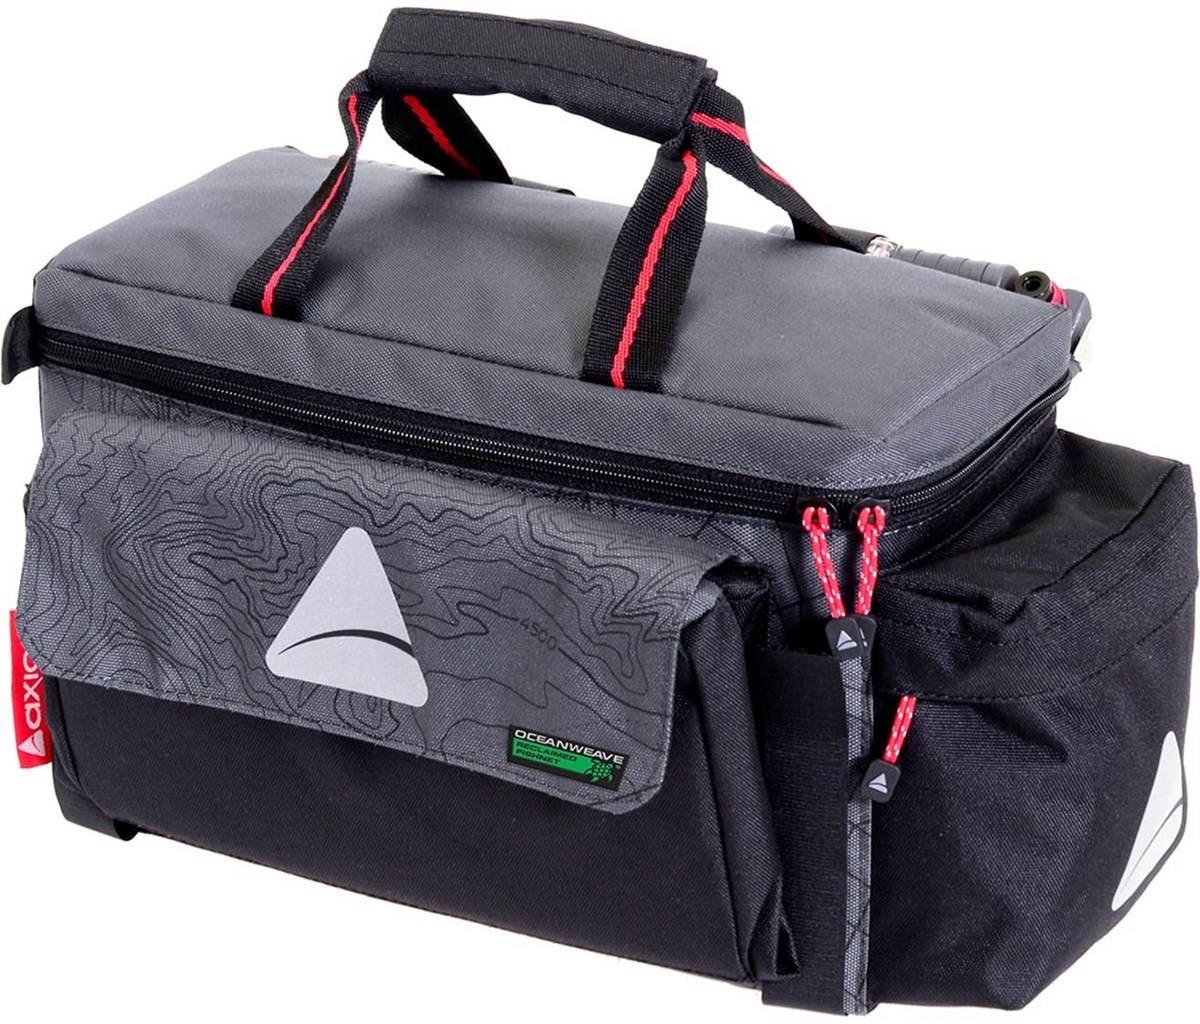 Axiom Seymour Oceanwave Truck EXP15+ Trunk Bag product image